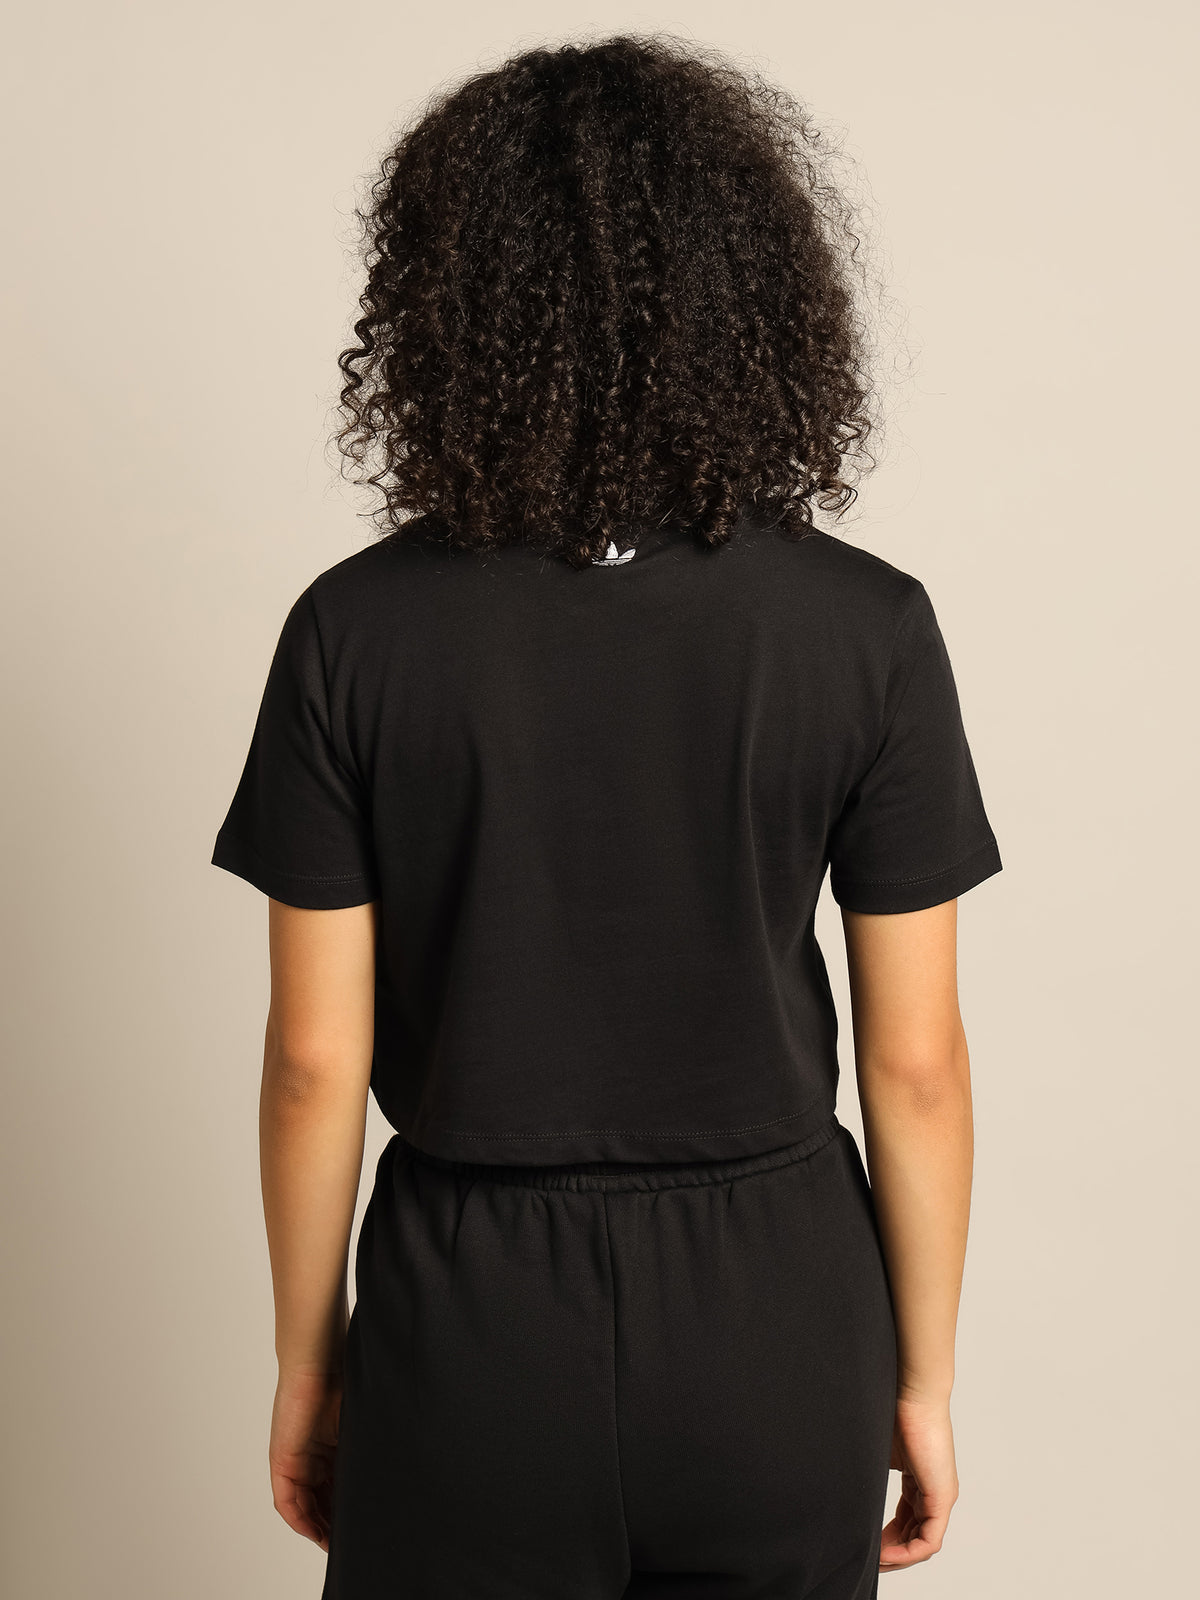 Cropped T-Shirt in Black